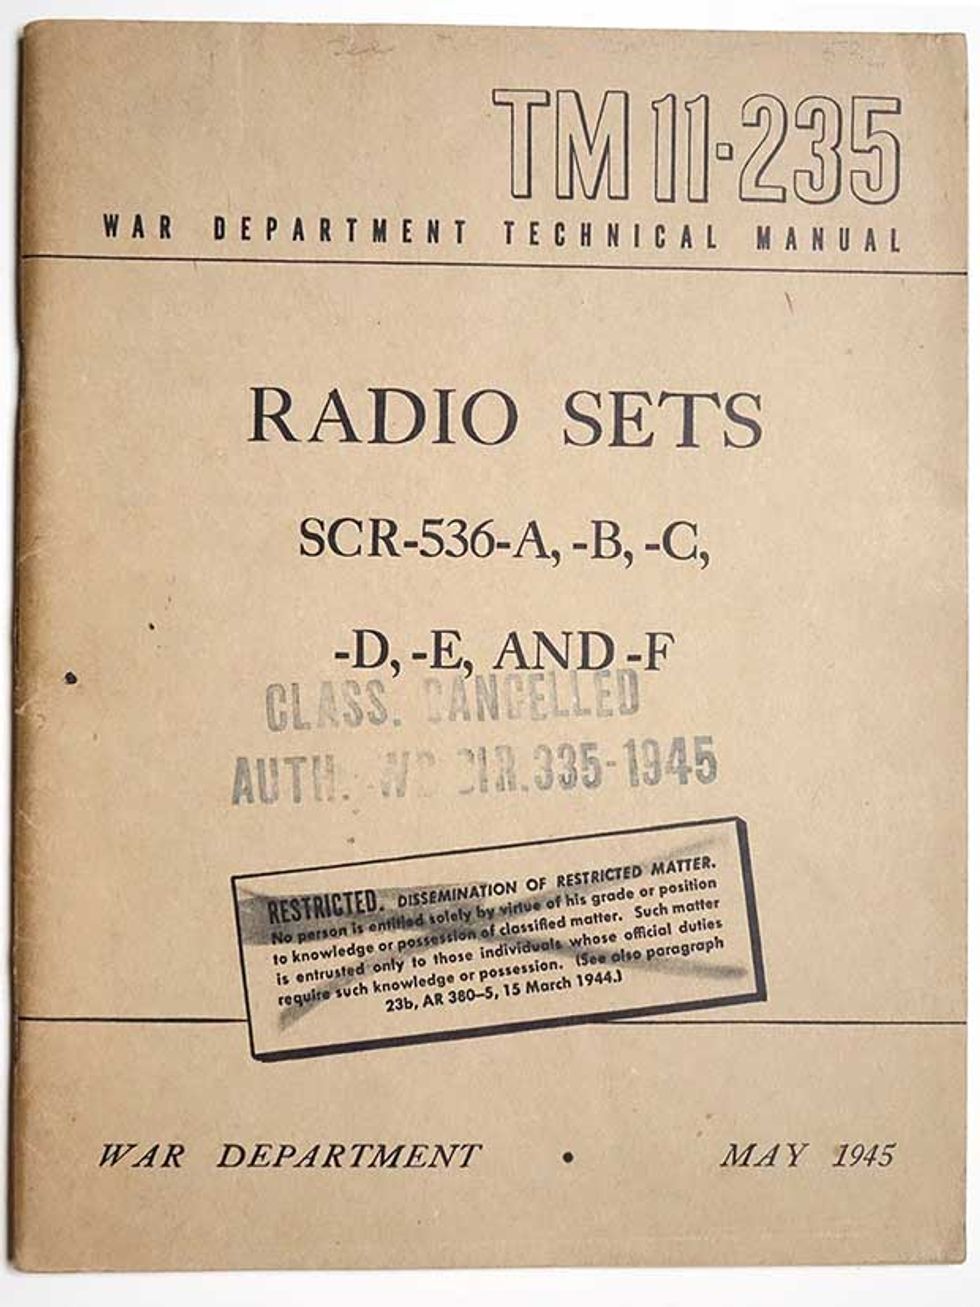 The SCR-536\u2019s technical manual included detailed suggestions on how to camouflage the radio and how to destroy it.